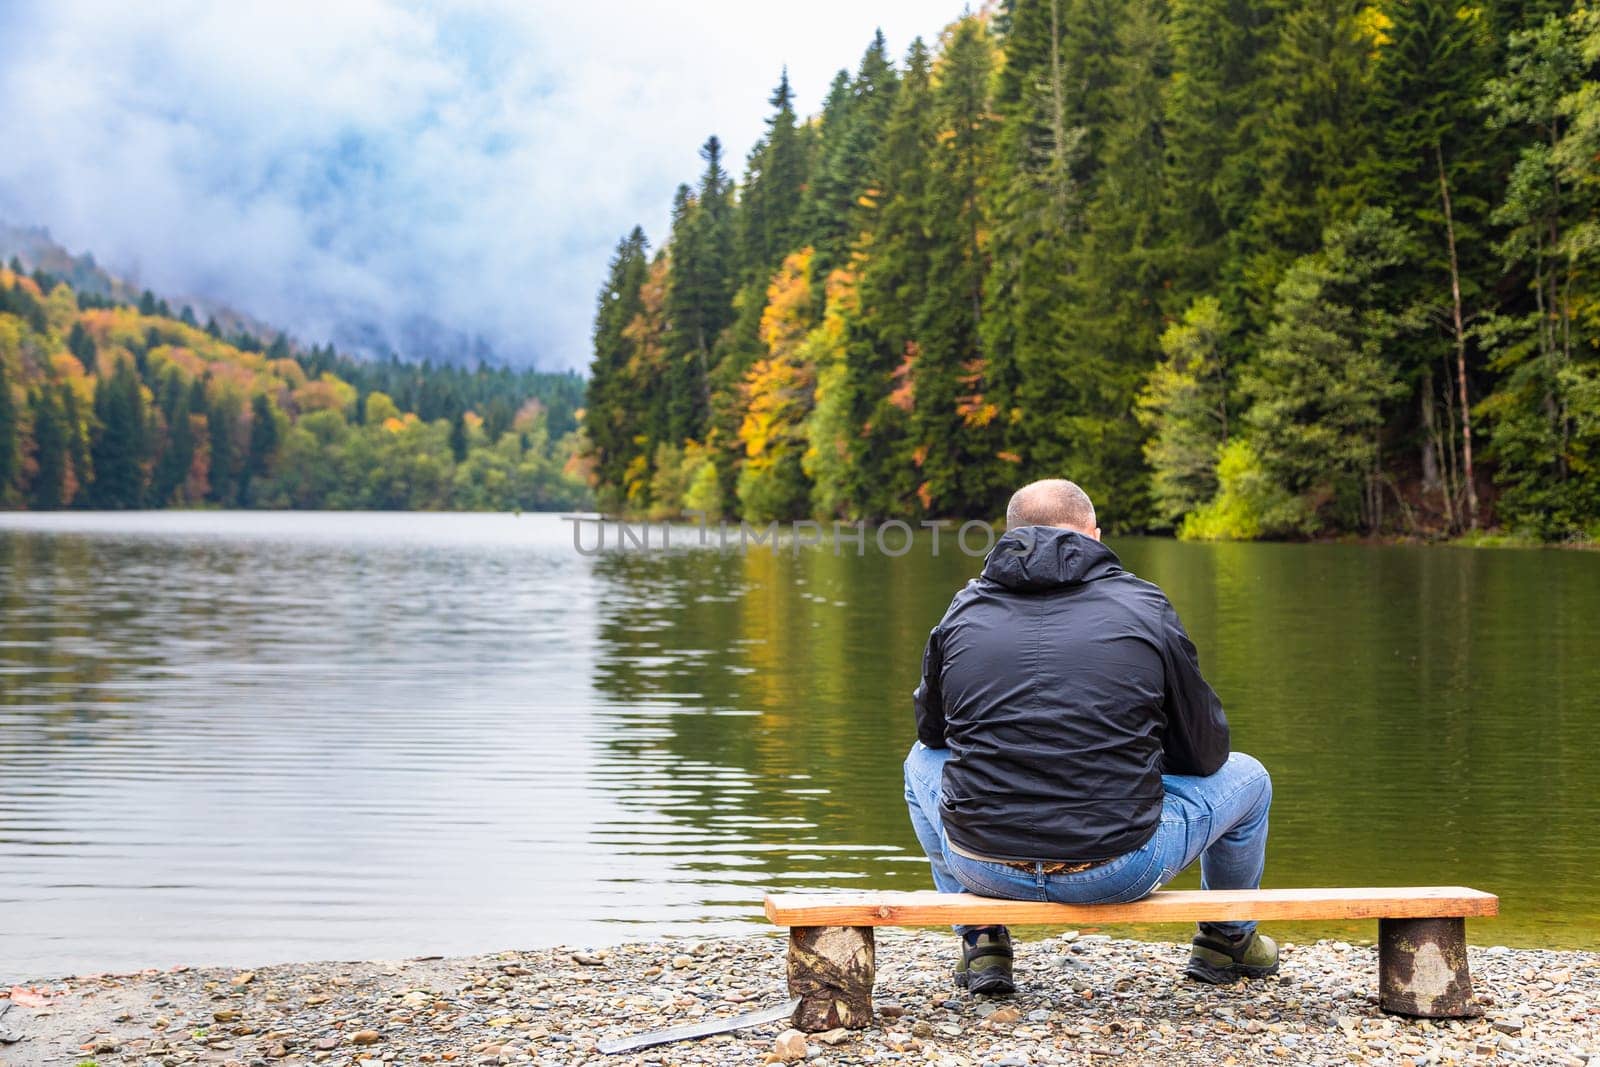 A man admires a picturesque view by a lake in the mountains surrounded by the beauty of nature.